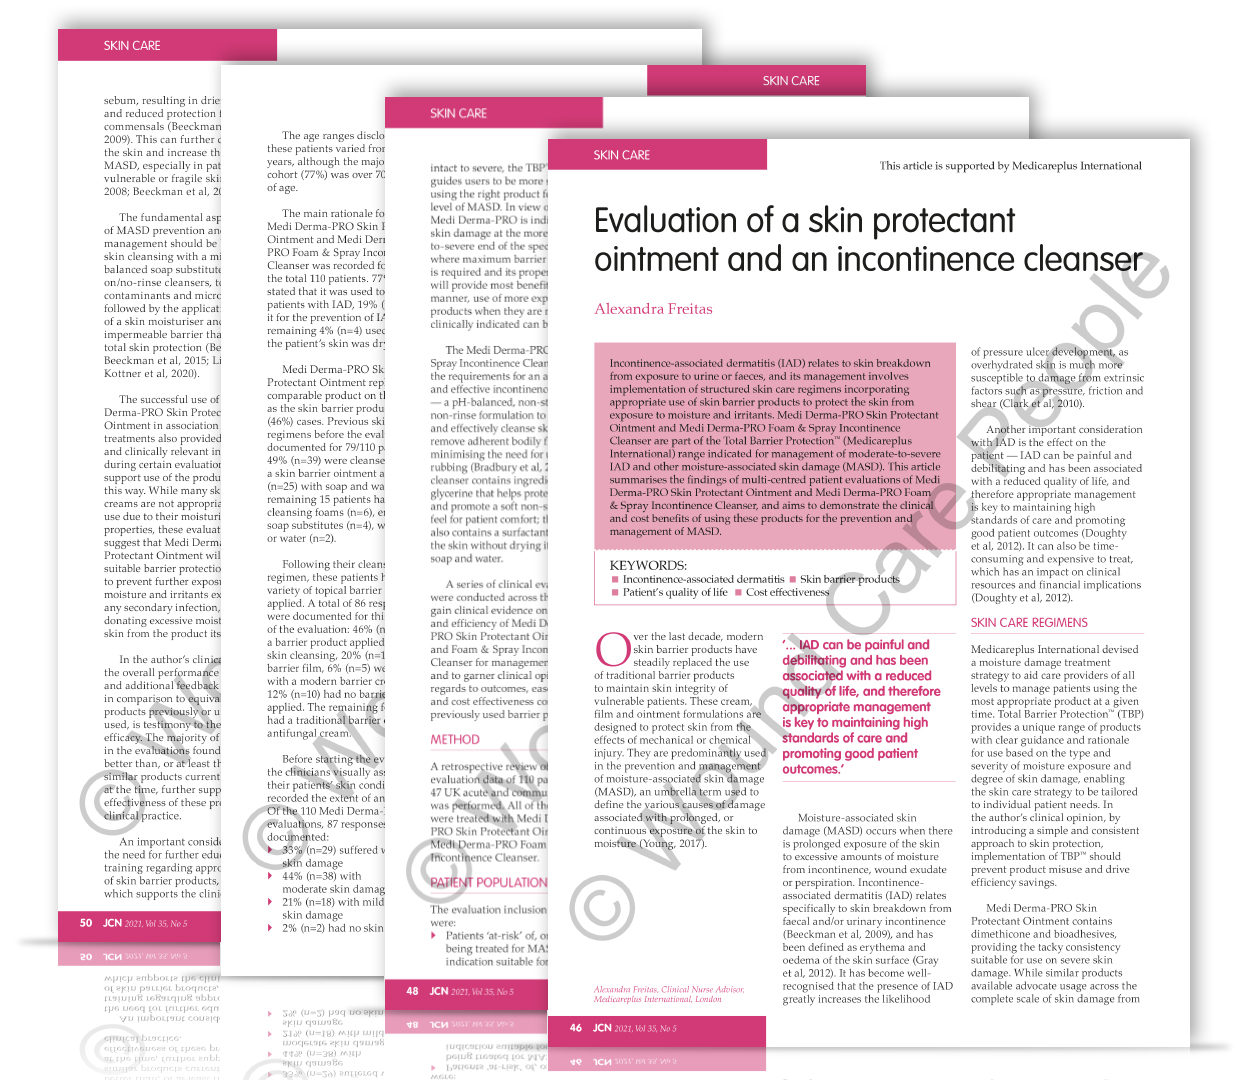 Evaluation of a skin protectant ointment and an incontinence cleanser